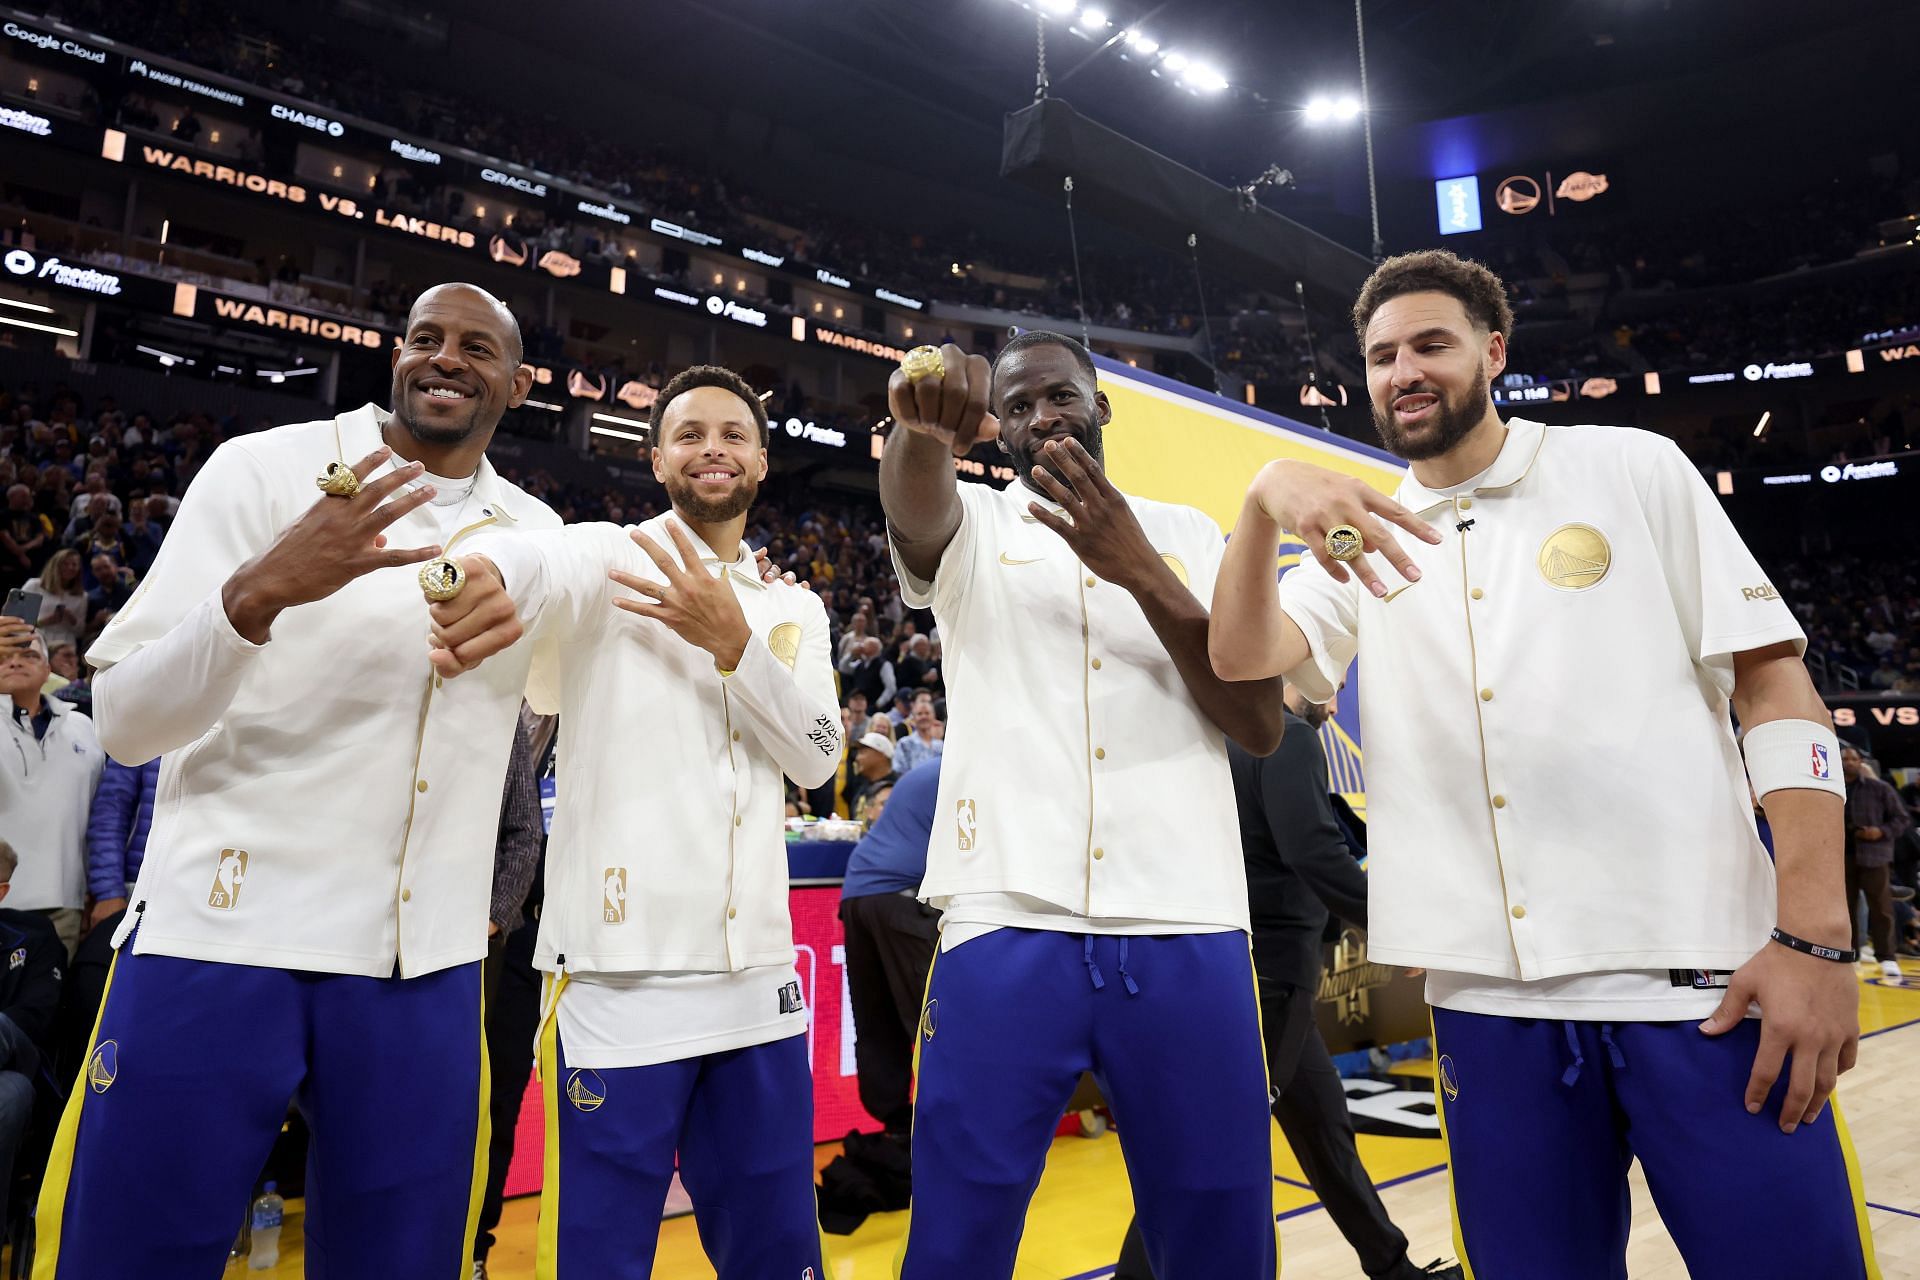 NBA News Today: Golden State Warriors celebrate ring night, Celtics honor  Bill Russell, Lakers struggle with shooting woes, and more